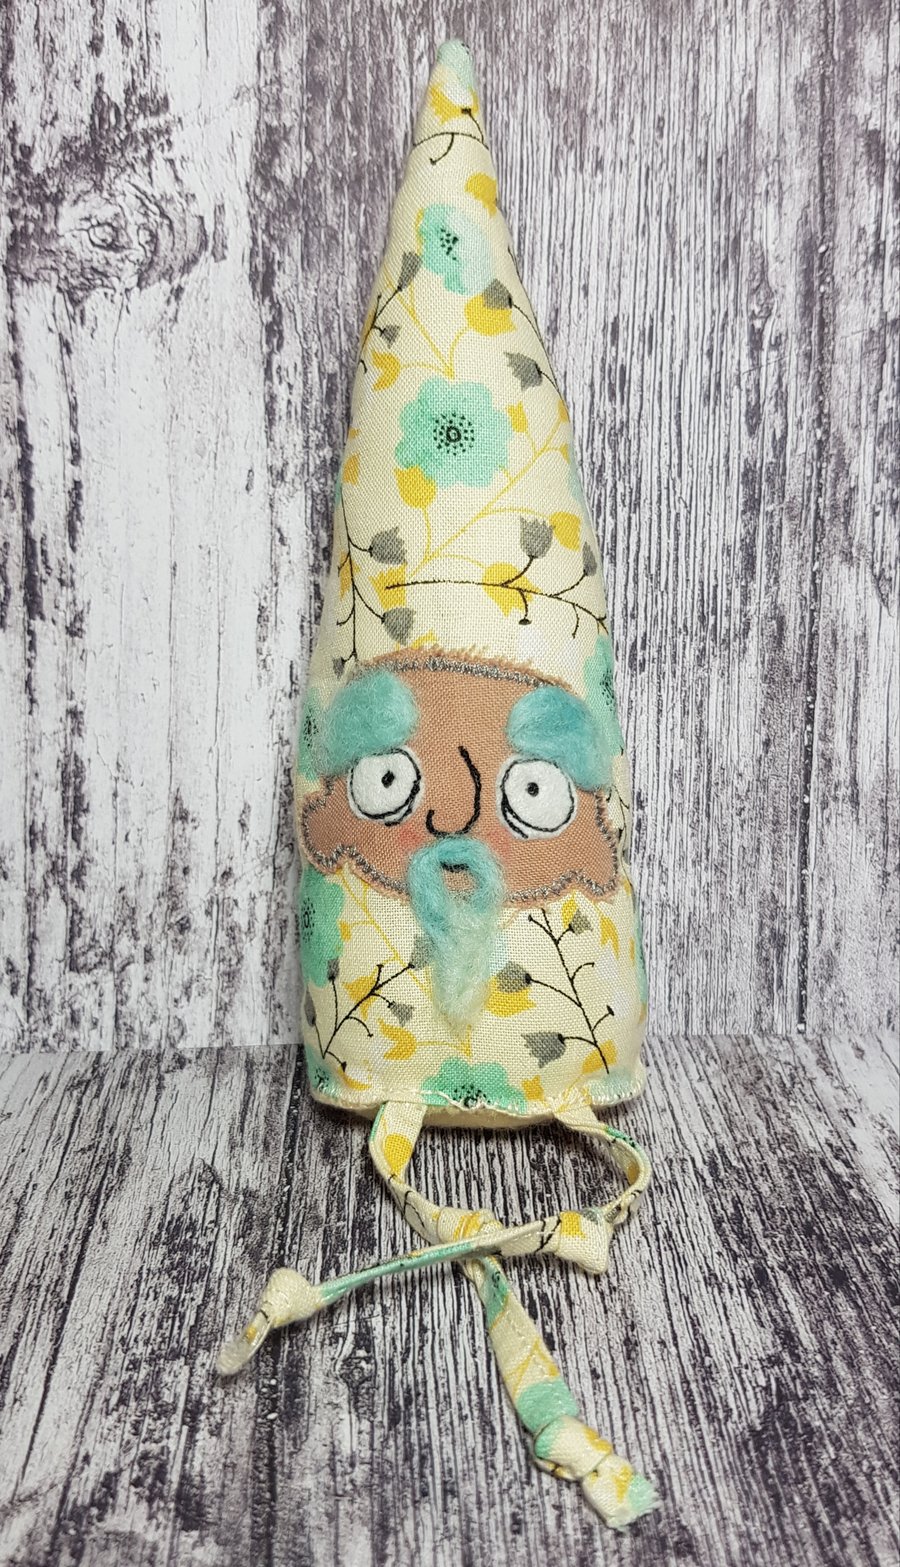 House Gnome in Mint, Blue, Yellow Floral Fabric - Shelf Decoration